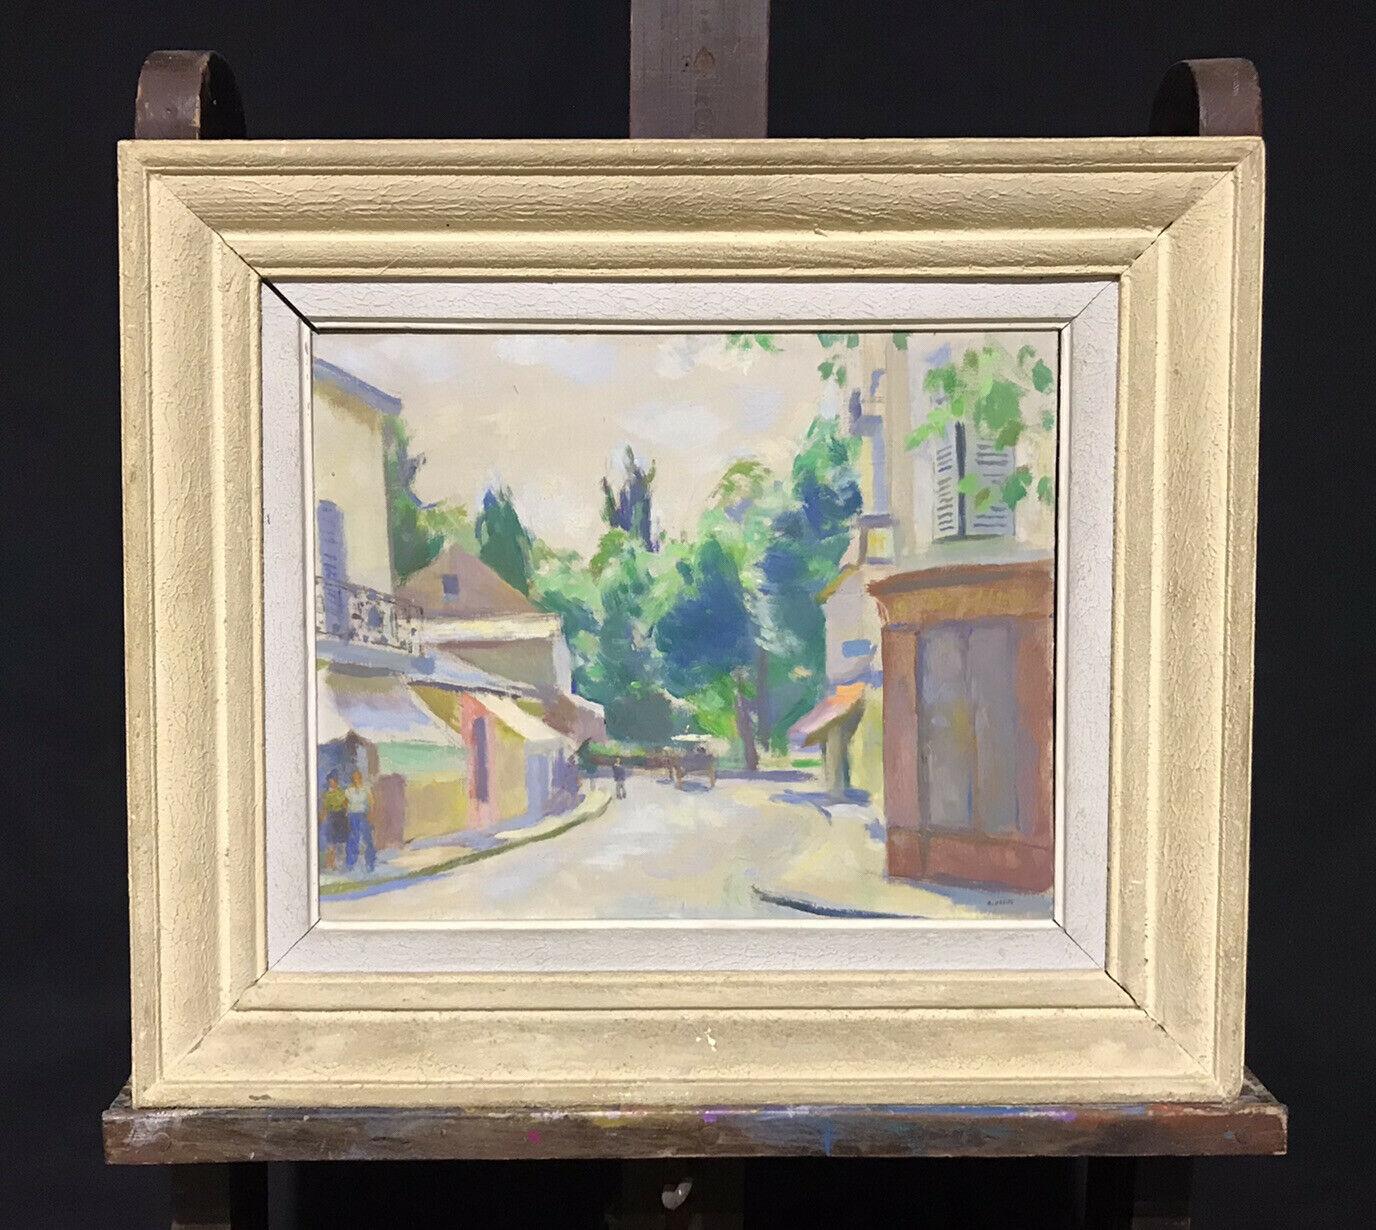 ARMAND-JACQUES ASSUS (1892-1977) SIGNED FRENCH 1950'S OIL - FRENCH TOWN SCENE - Painting by Armand-Jacques Assus (1892-1977)